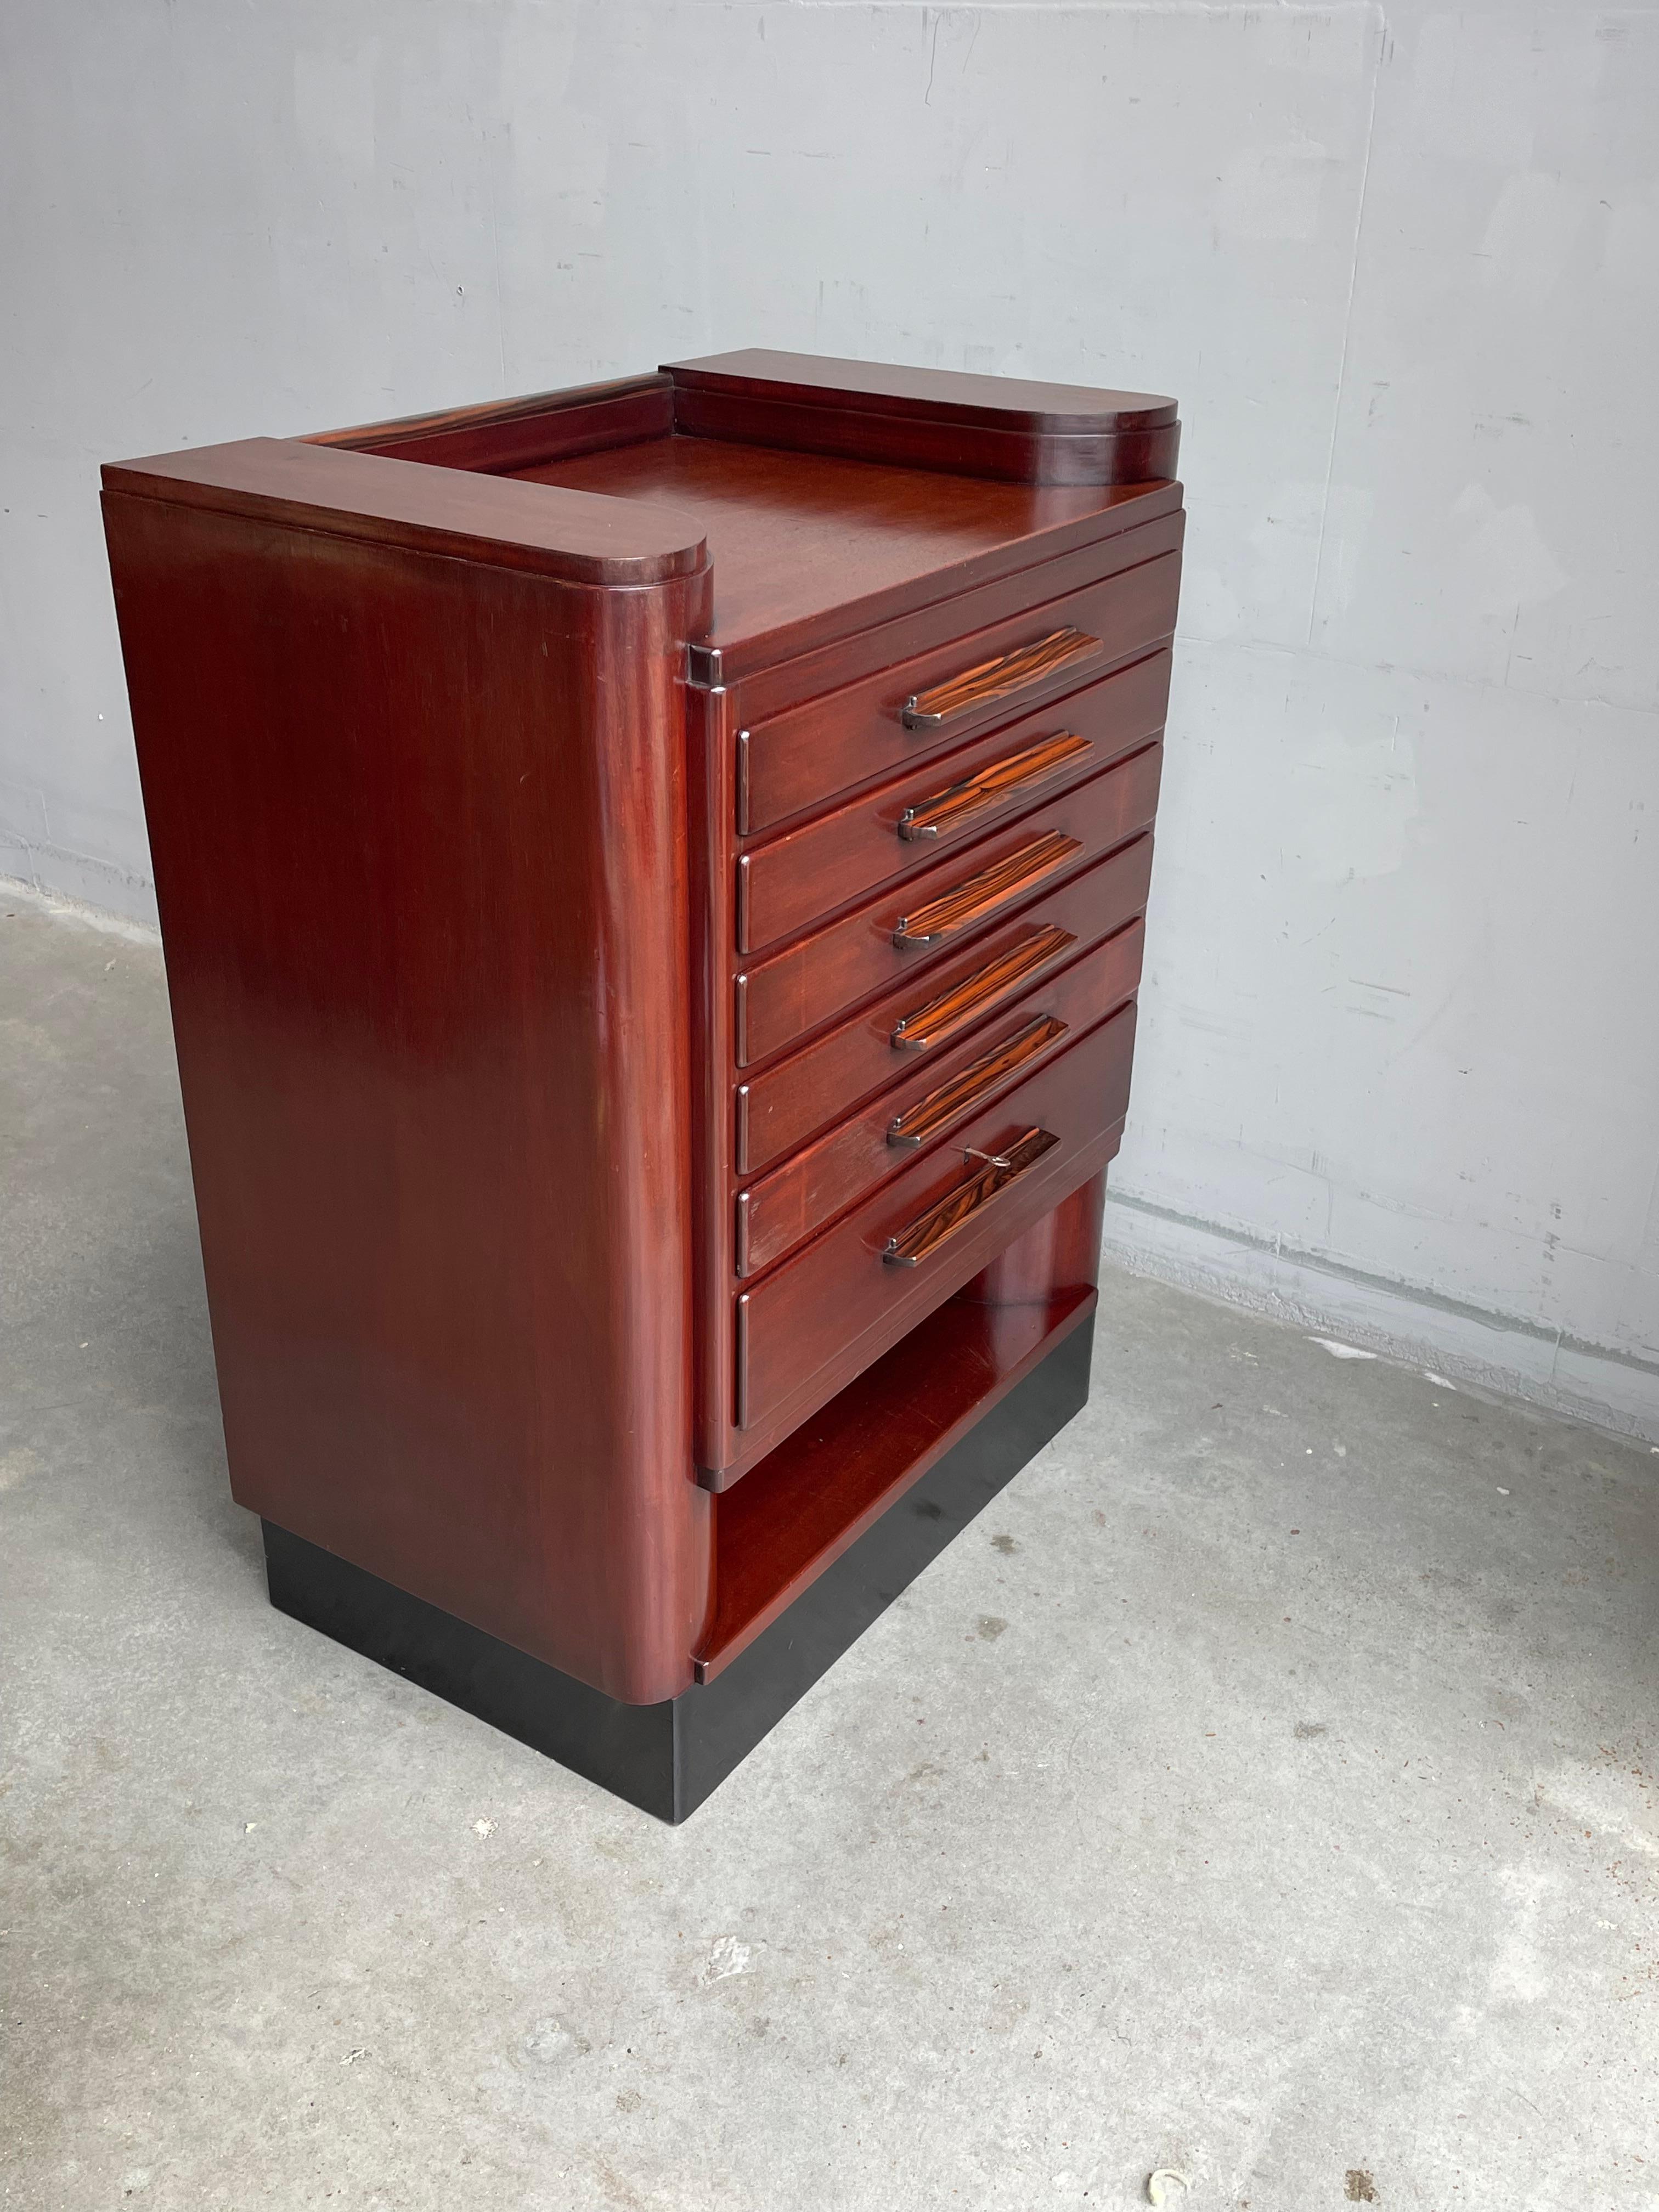 Rare Art Deco Chest of Drawers / Filing Cabinet with Stunning Coromandel Handles For Sale 9